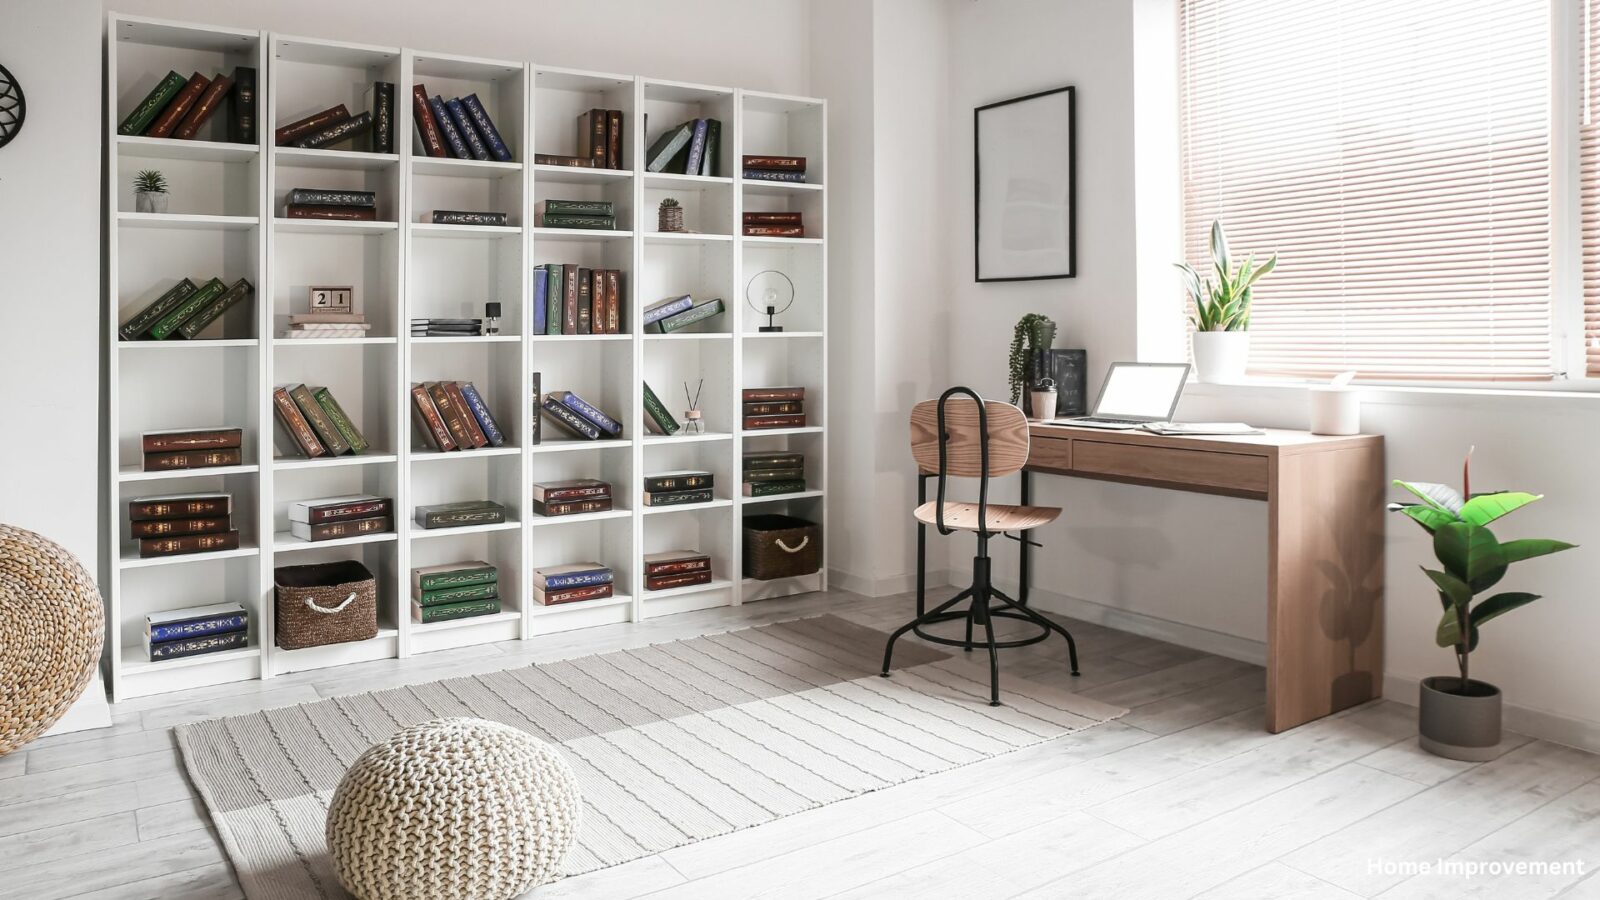 Storage Solutions for Every Room